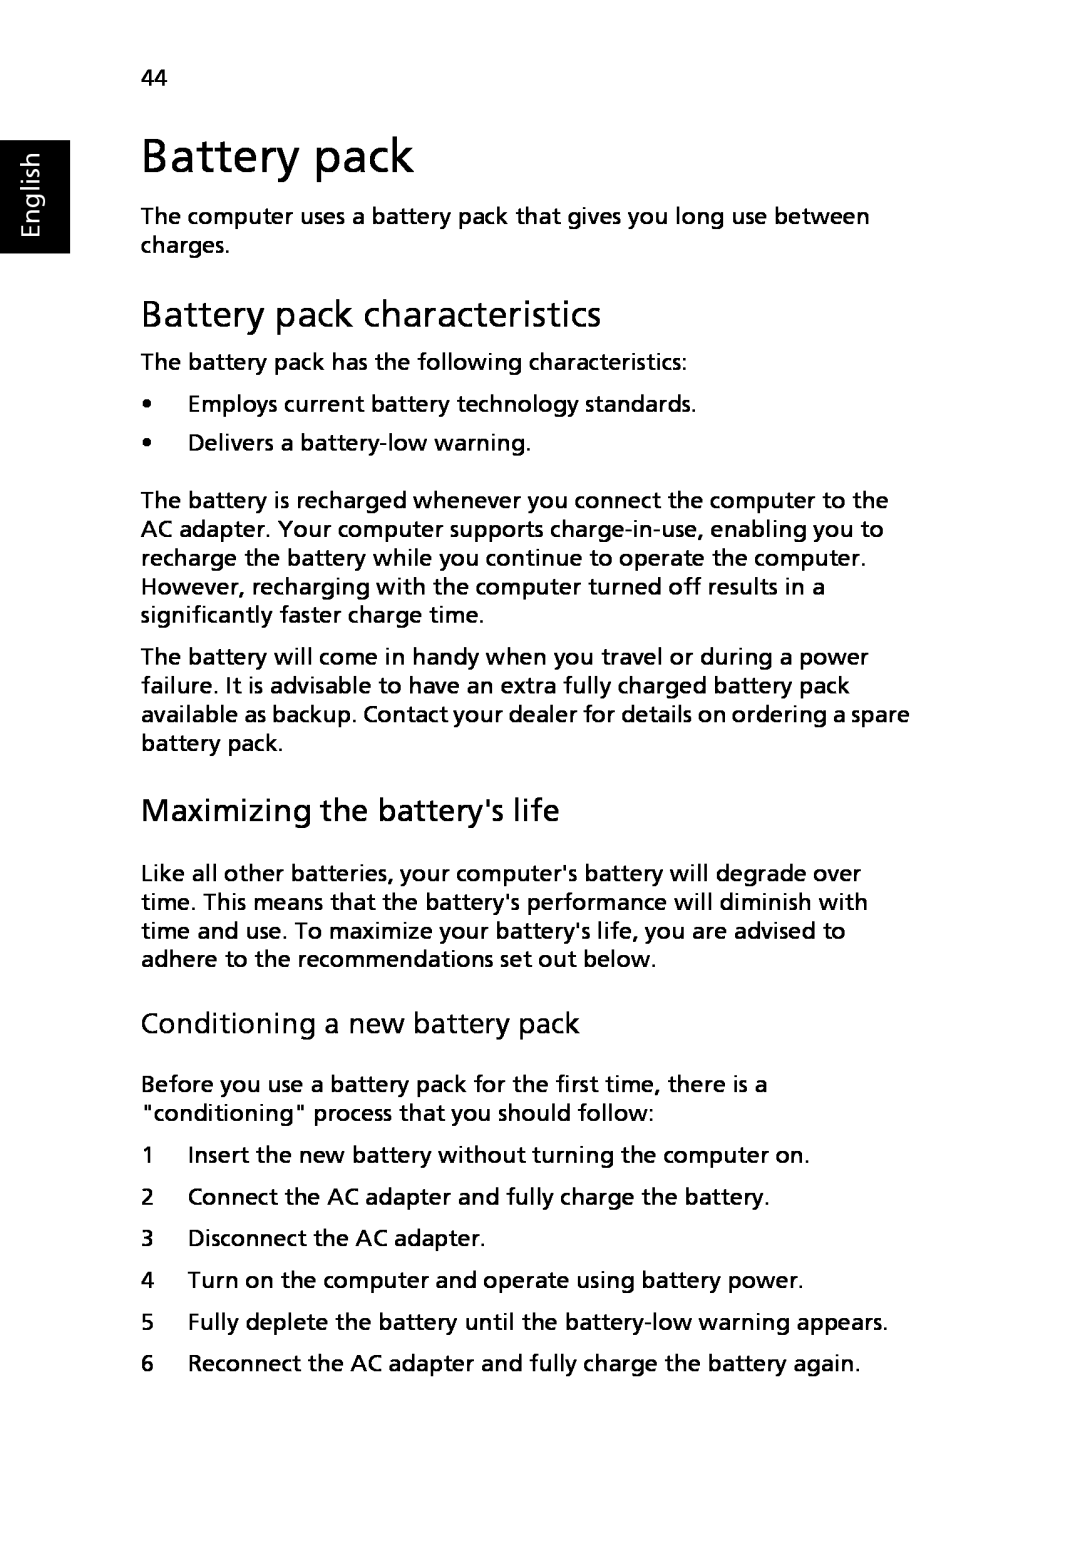 Acer 5220, 5520G Battery pack characteristics, Maximizing the batterys life, Conditioning a new battery pack, English 